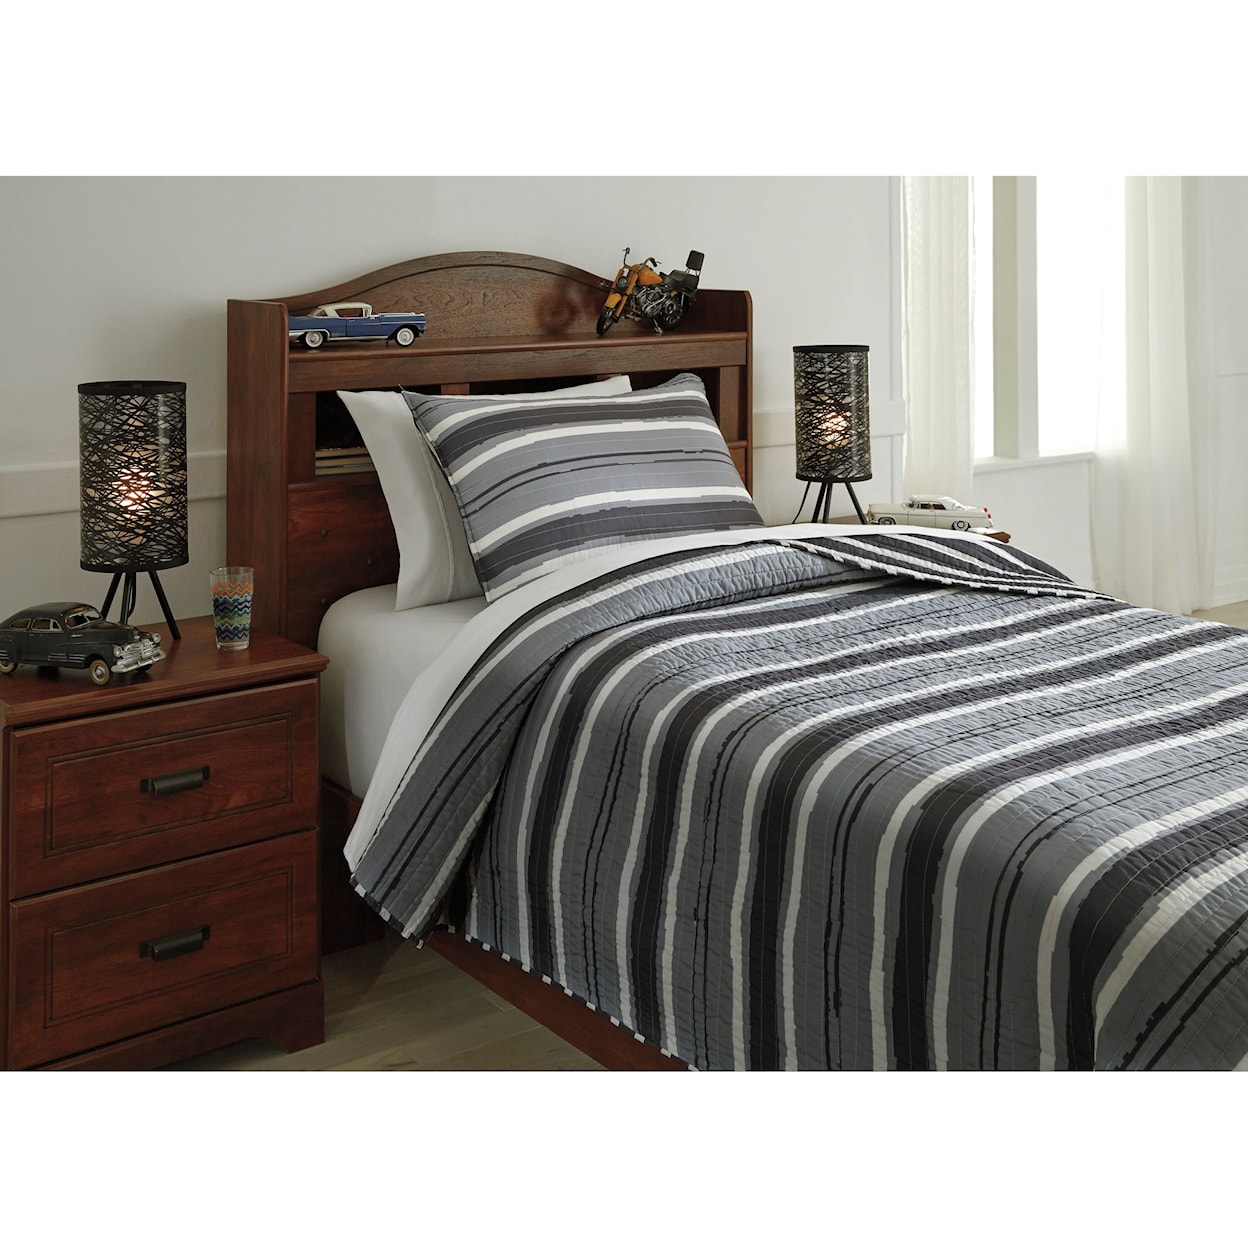 Signature Design by Ashley Bedding Sets Twin Merlin Coverlet Set